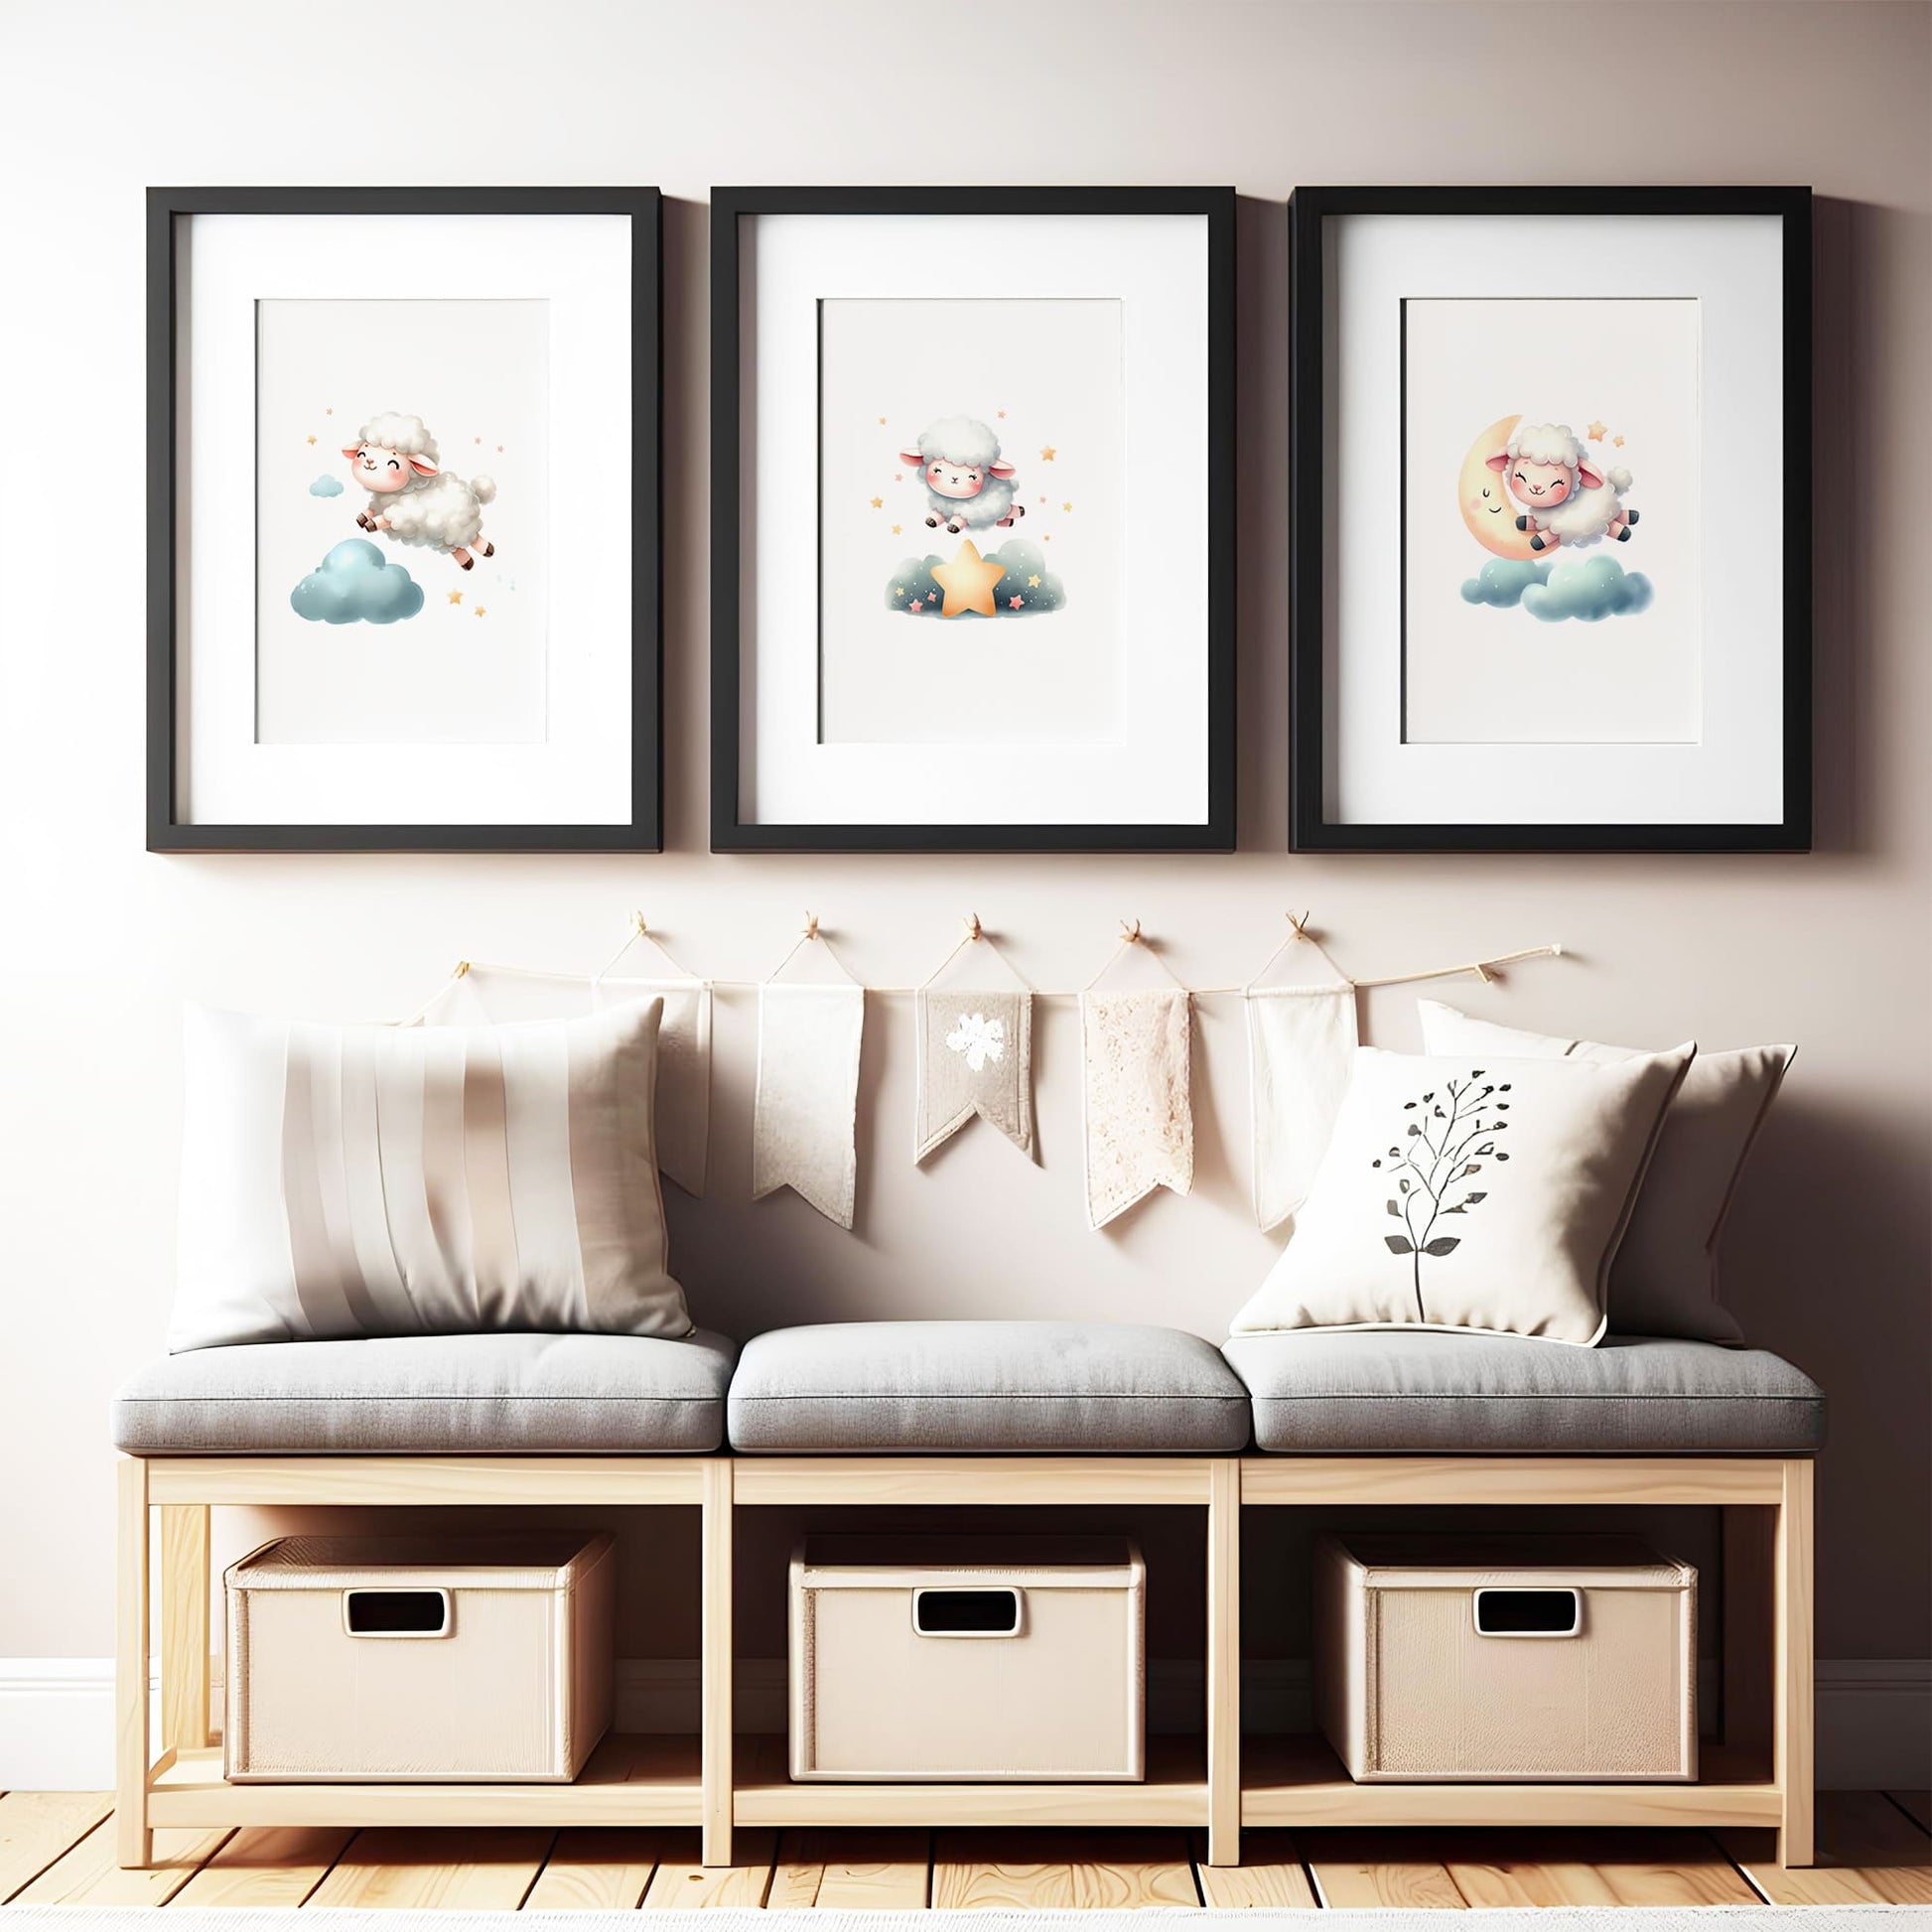 Set of three A4 prints in watercolour style. Each print depicts a different variant of a little lamb jumping over a cloud.